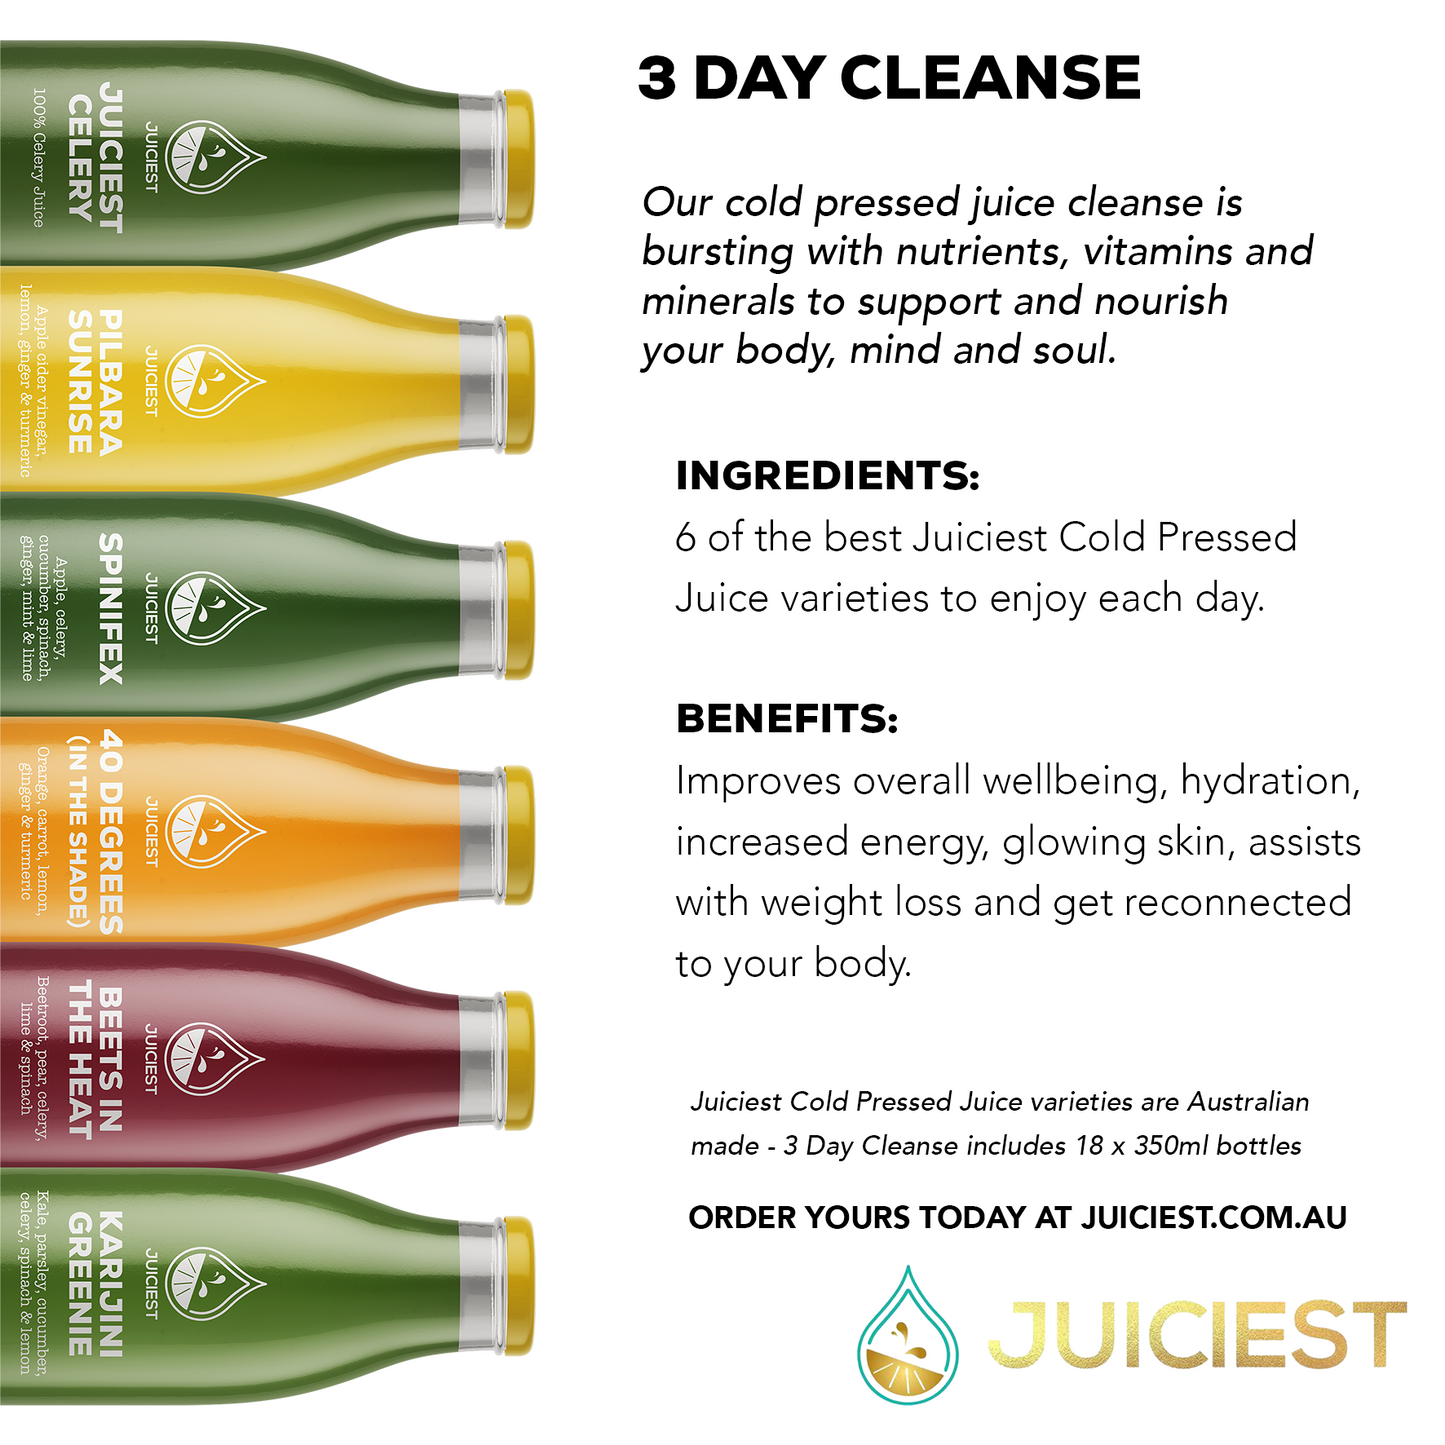 Juiciest 3 Day Cleanse Infographic